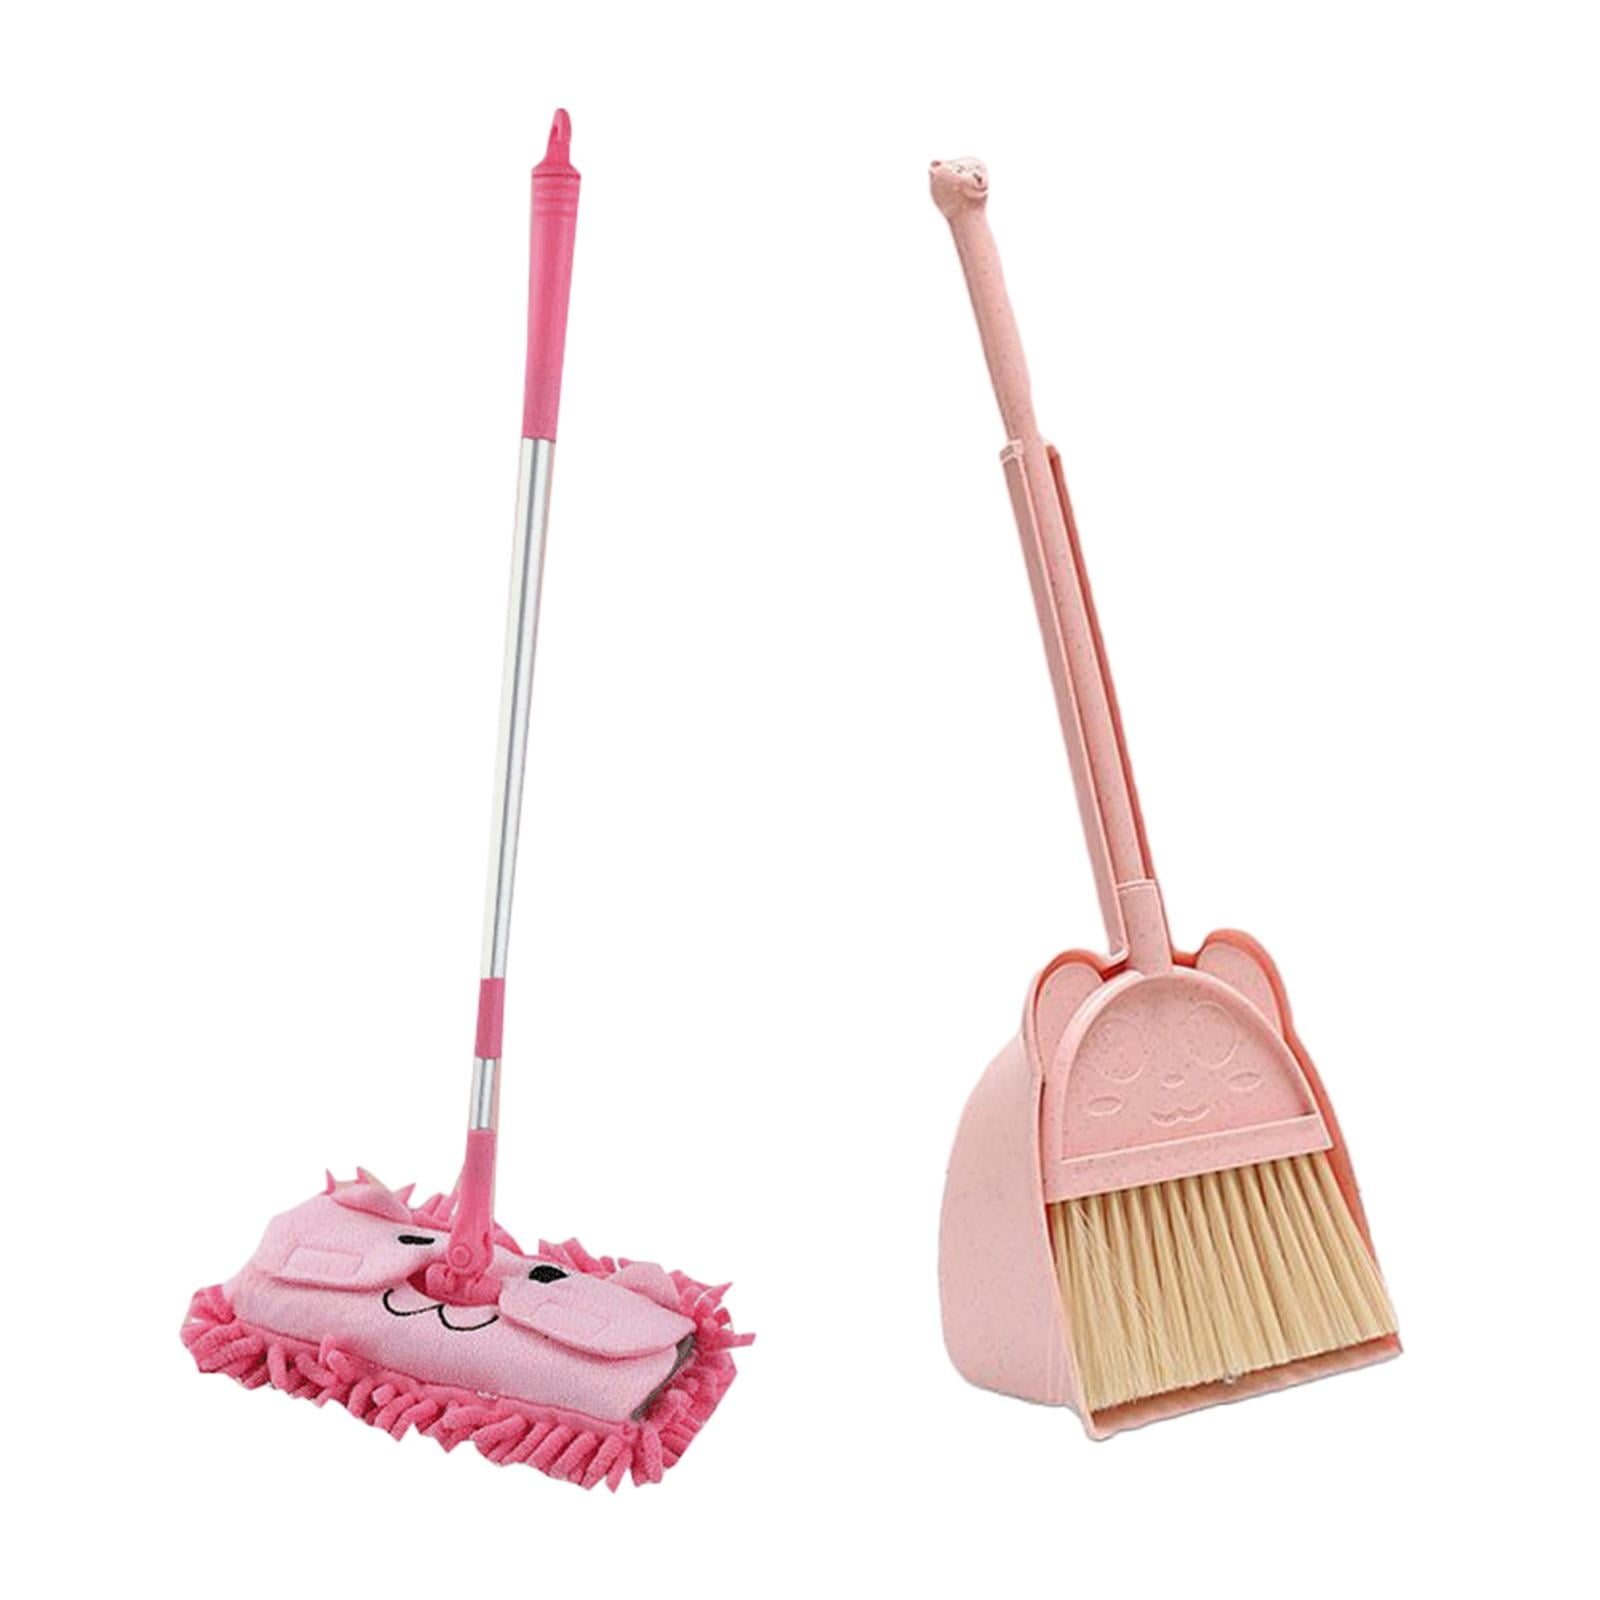 GANAZONO Mini Broom with Dustpan for Kids Pretend Play House Cleaning Toys  Small Broom and Dustpan Set for Office Home Table Desk Pink